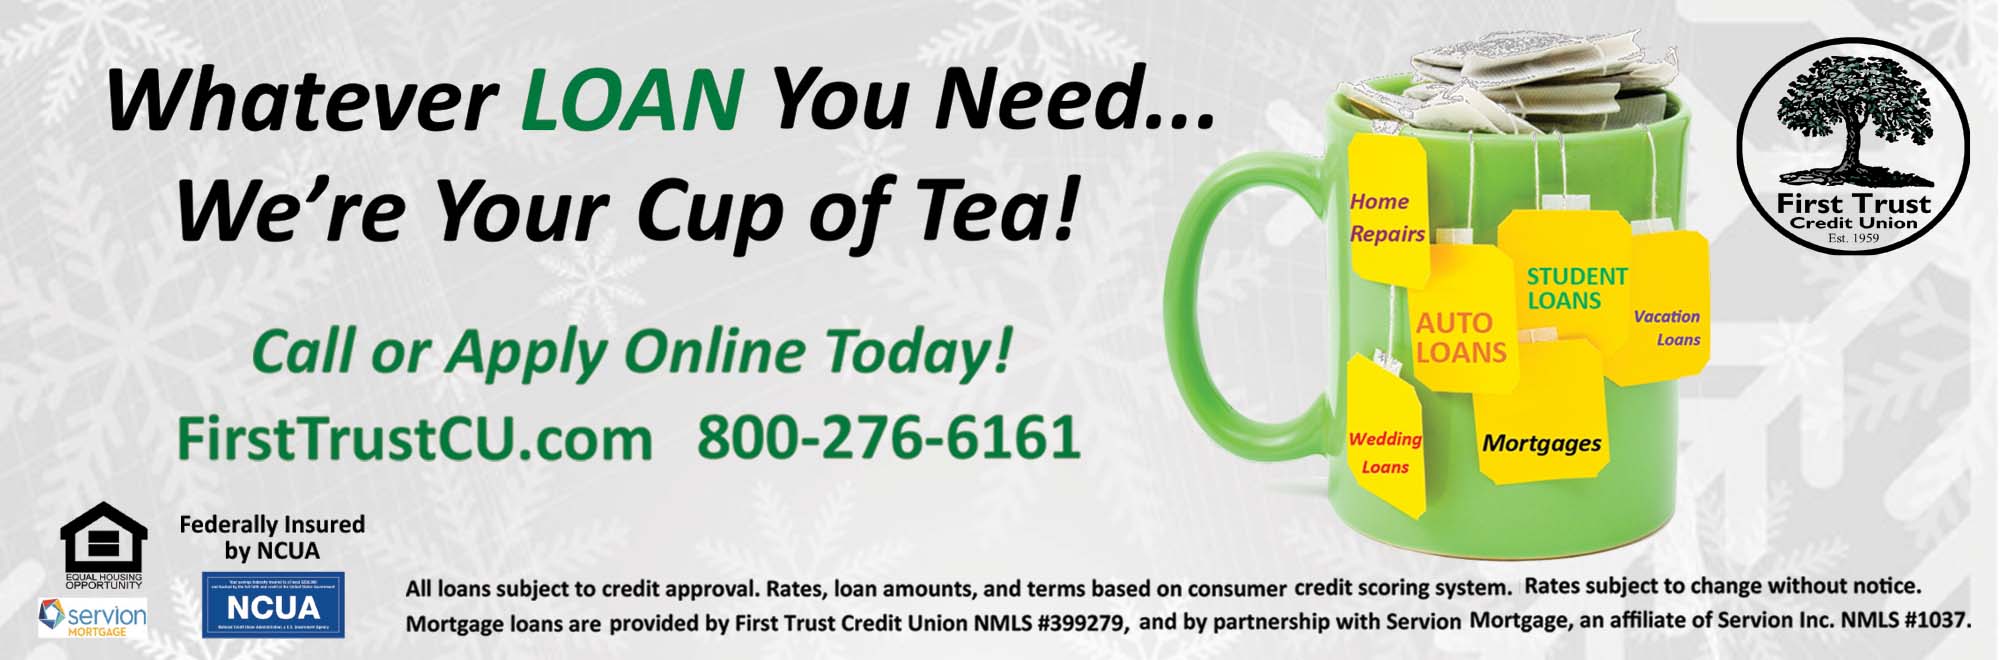 Whatever loan you need, we're your cup of tea!